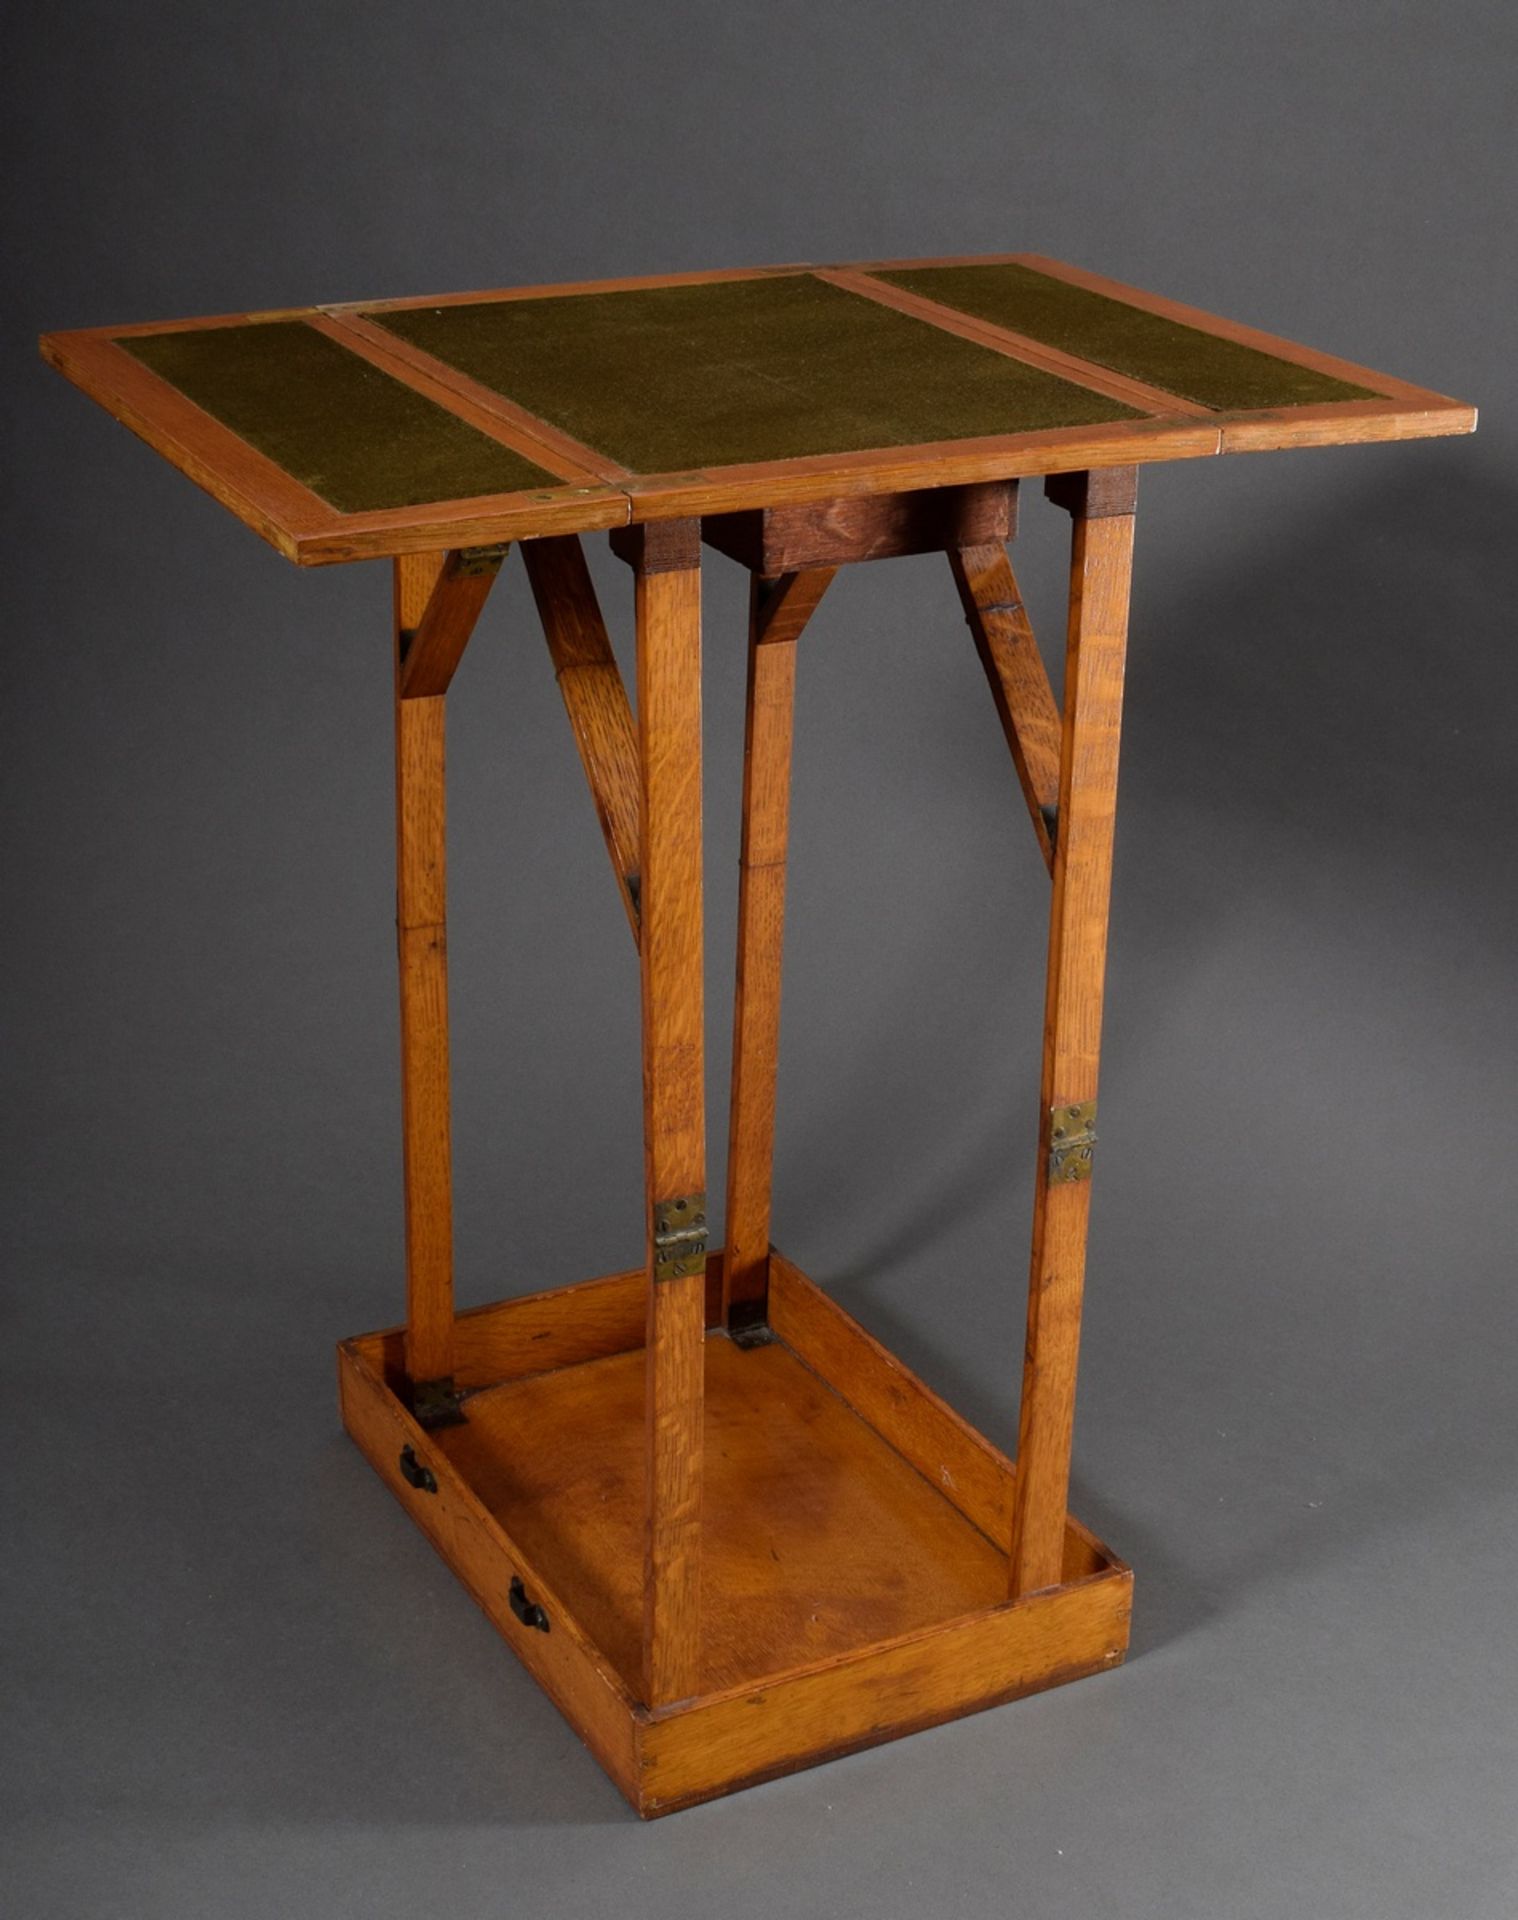 Travel patent table with green felt tops and two drawers, wood, foldable, num. "Patent Nr. 14097",  - Image 2 of 10